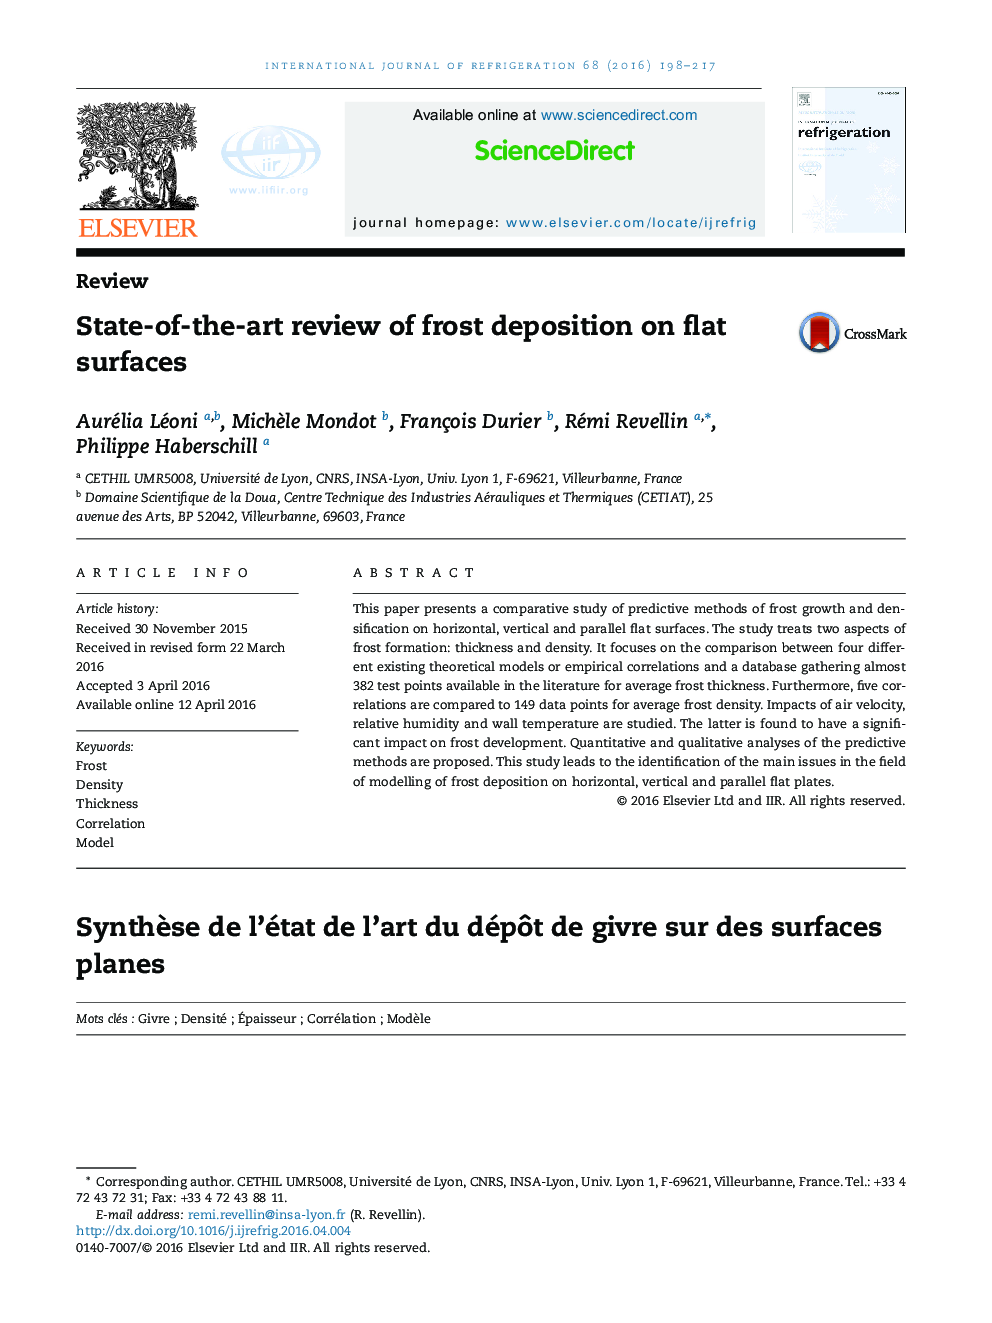 State-of-the-art review of frost deposition on flat surfaces